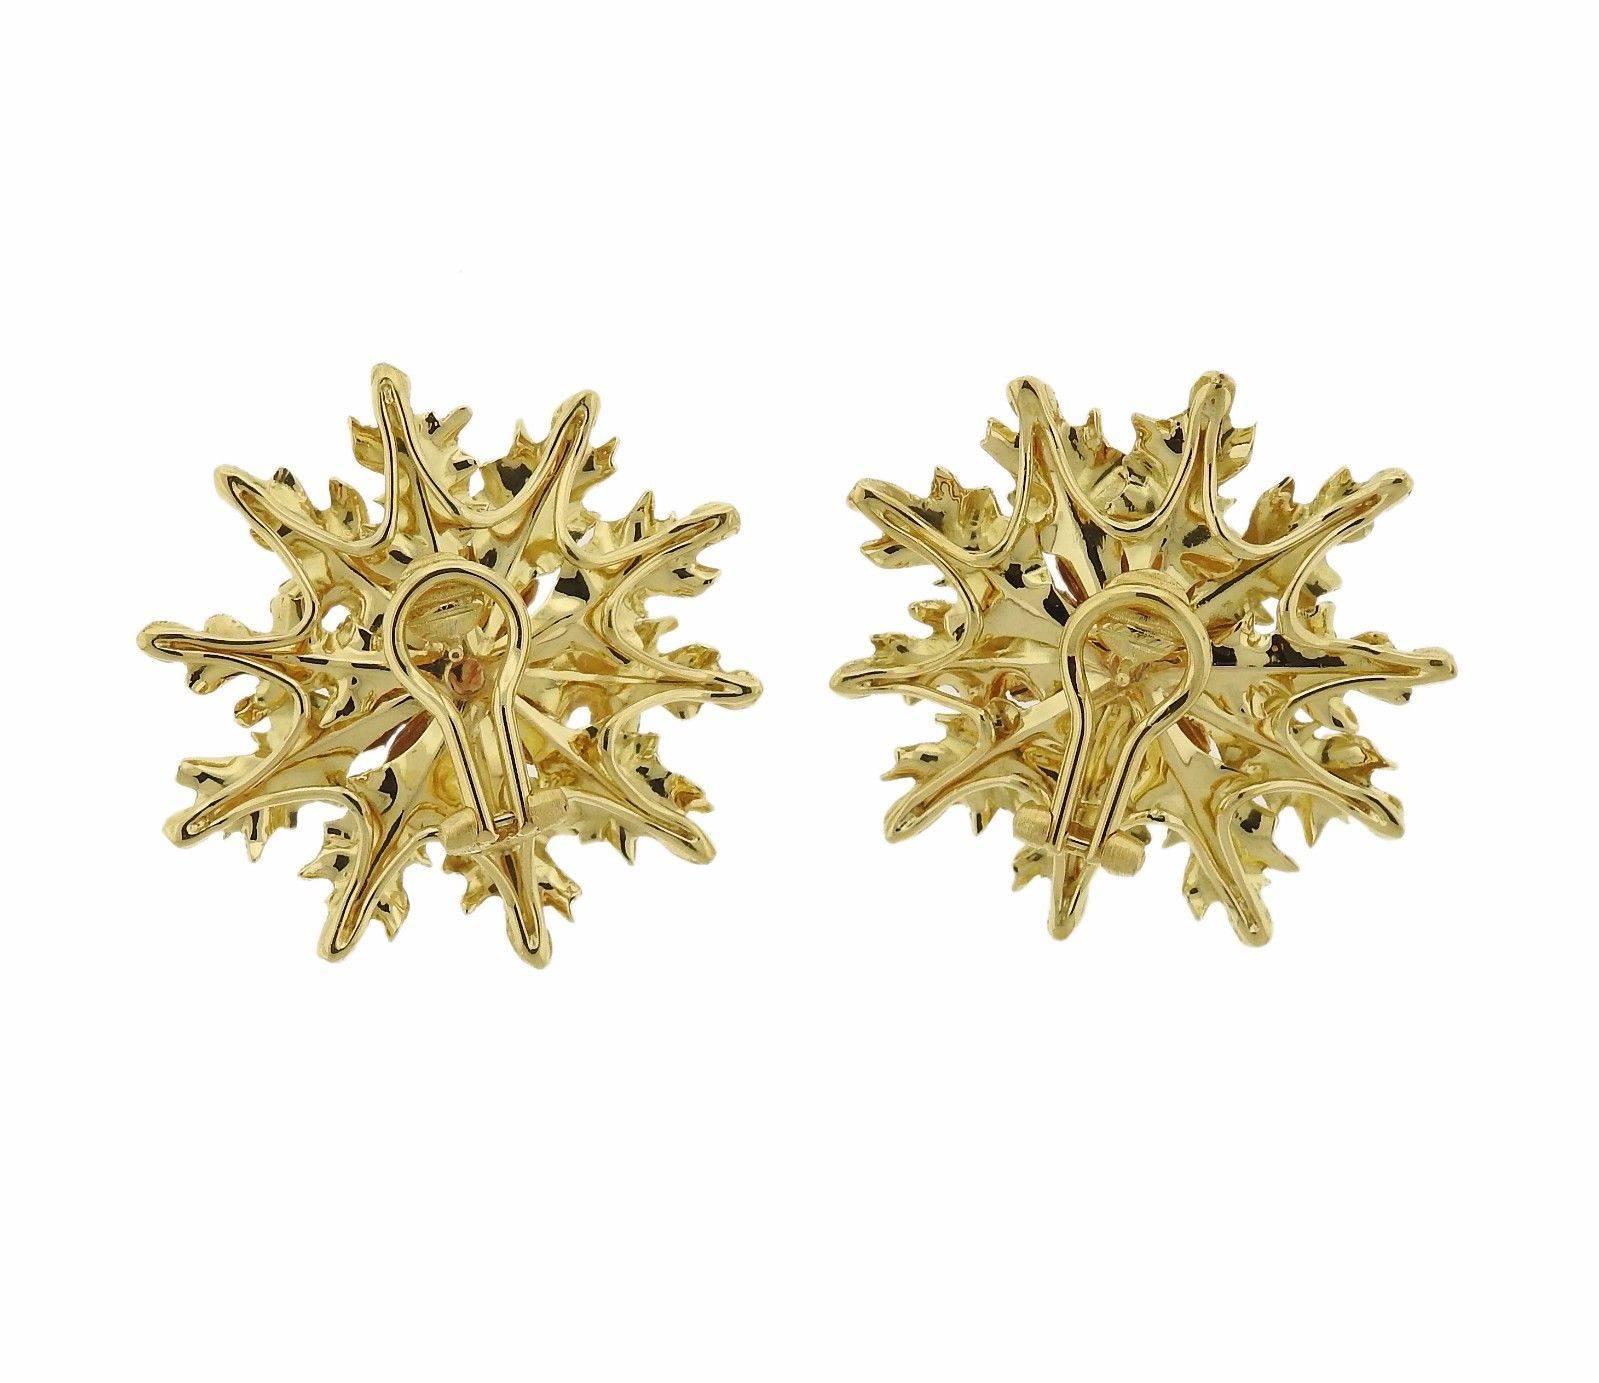 A pair of 18k gold flower earrings.  The earrings measure 36mm x 37mm and weigh 19.8 grams.  Marked: Italy, 18k, Buccellati.  The earrings come with Buccellati paperwork.  The retail price for this pair is $15420.